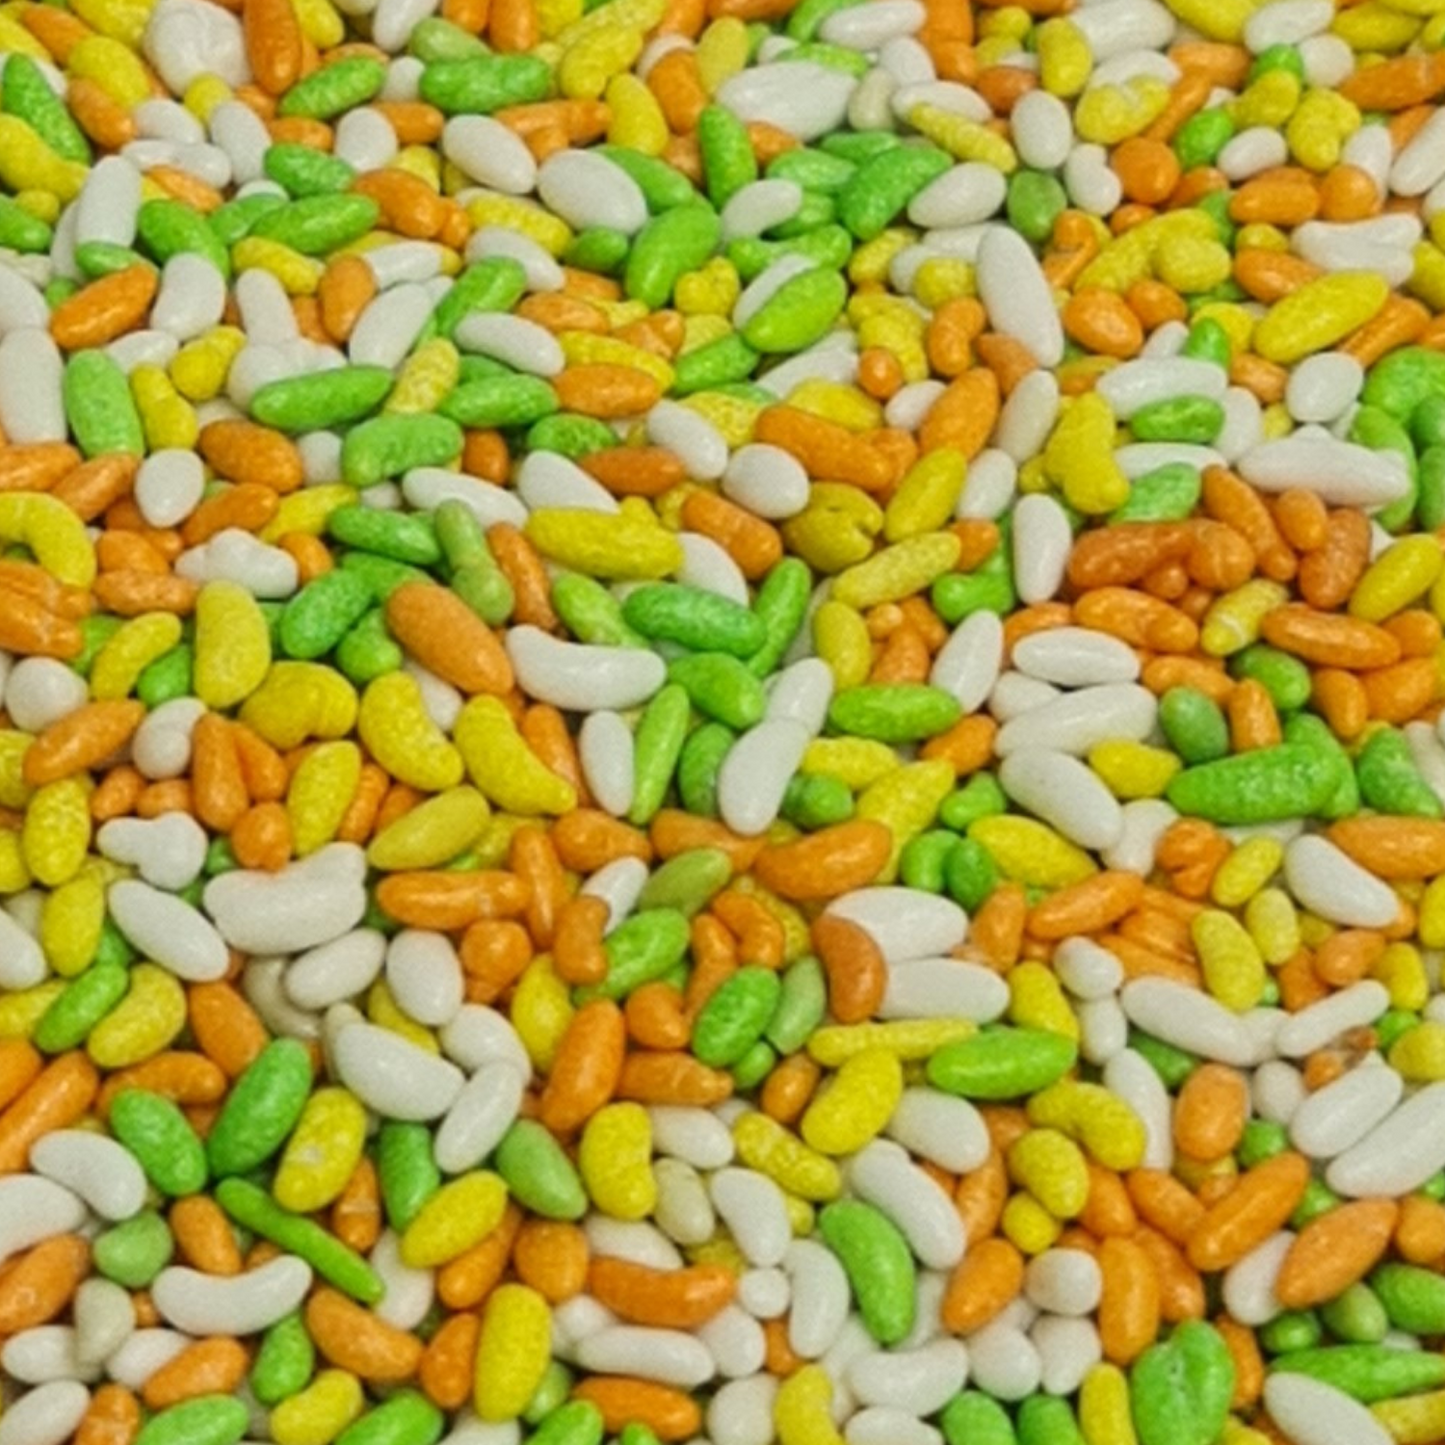 Colourful sugar-coated fennel seeds